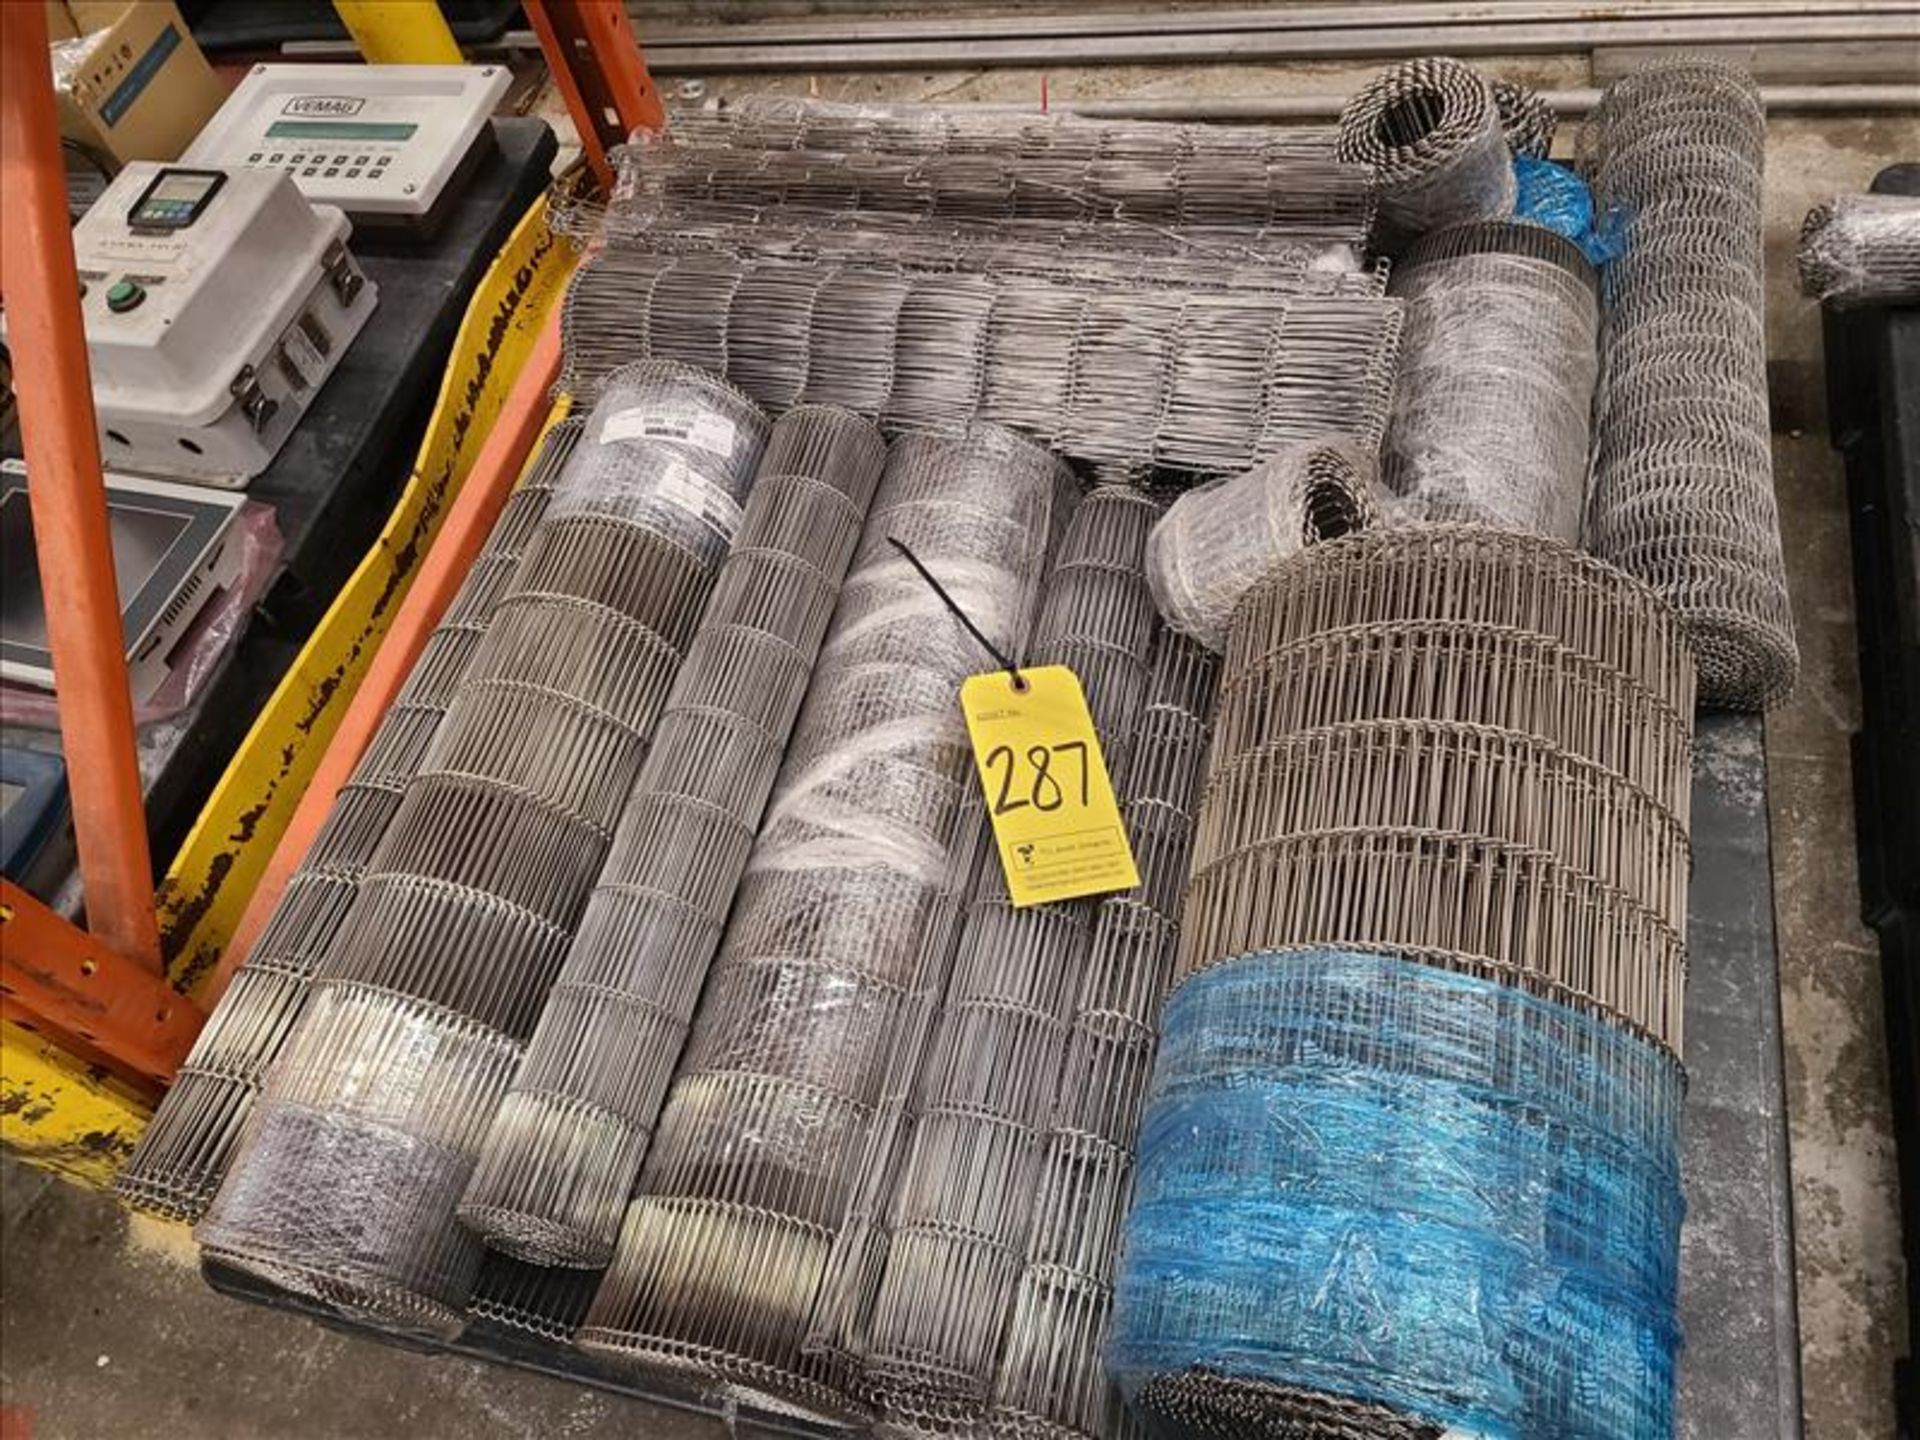 misc. wire mesh conveyor belts, stainless steel [Loc. Maintenance Dept.] - Image 2 of 4